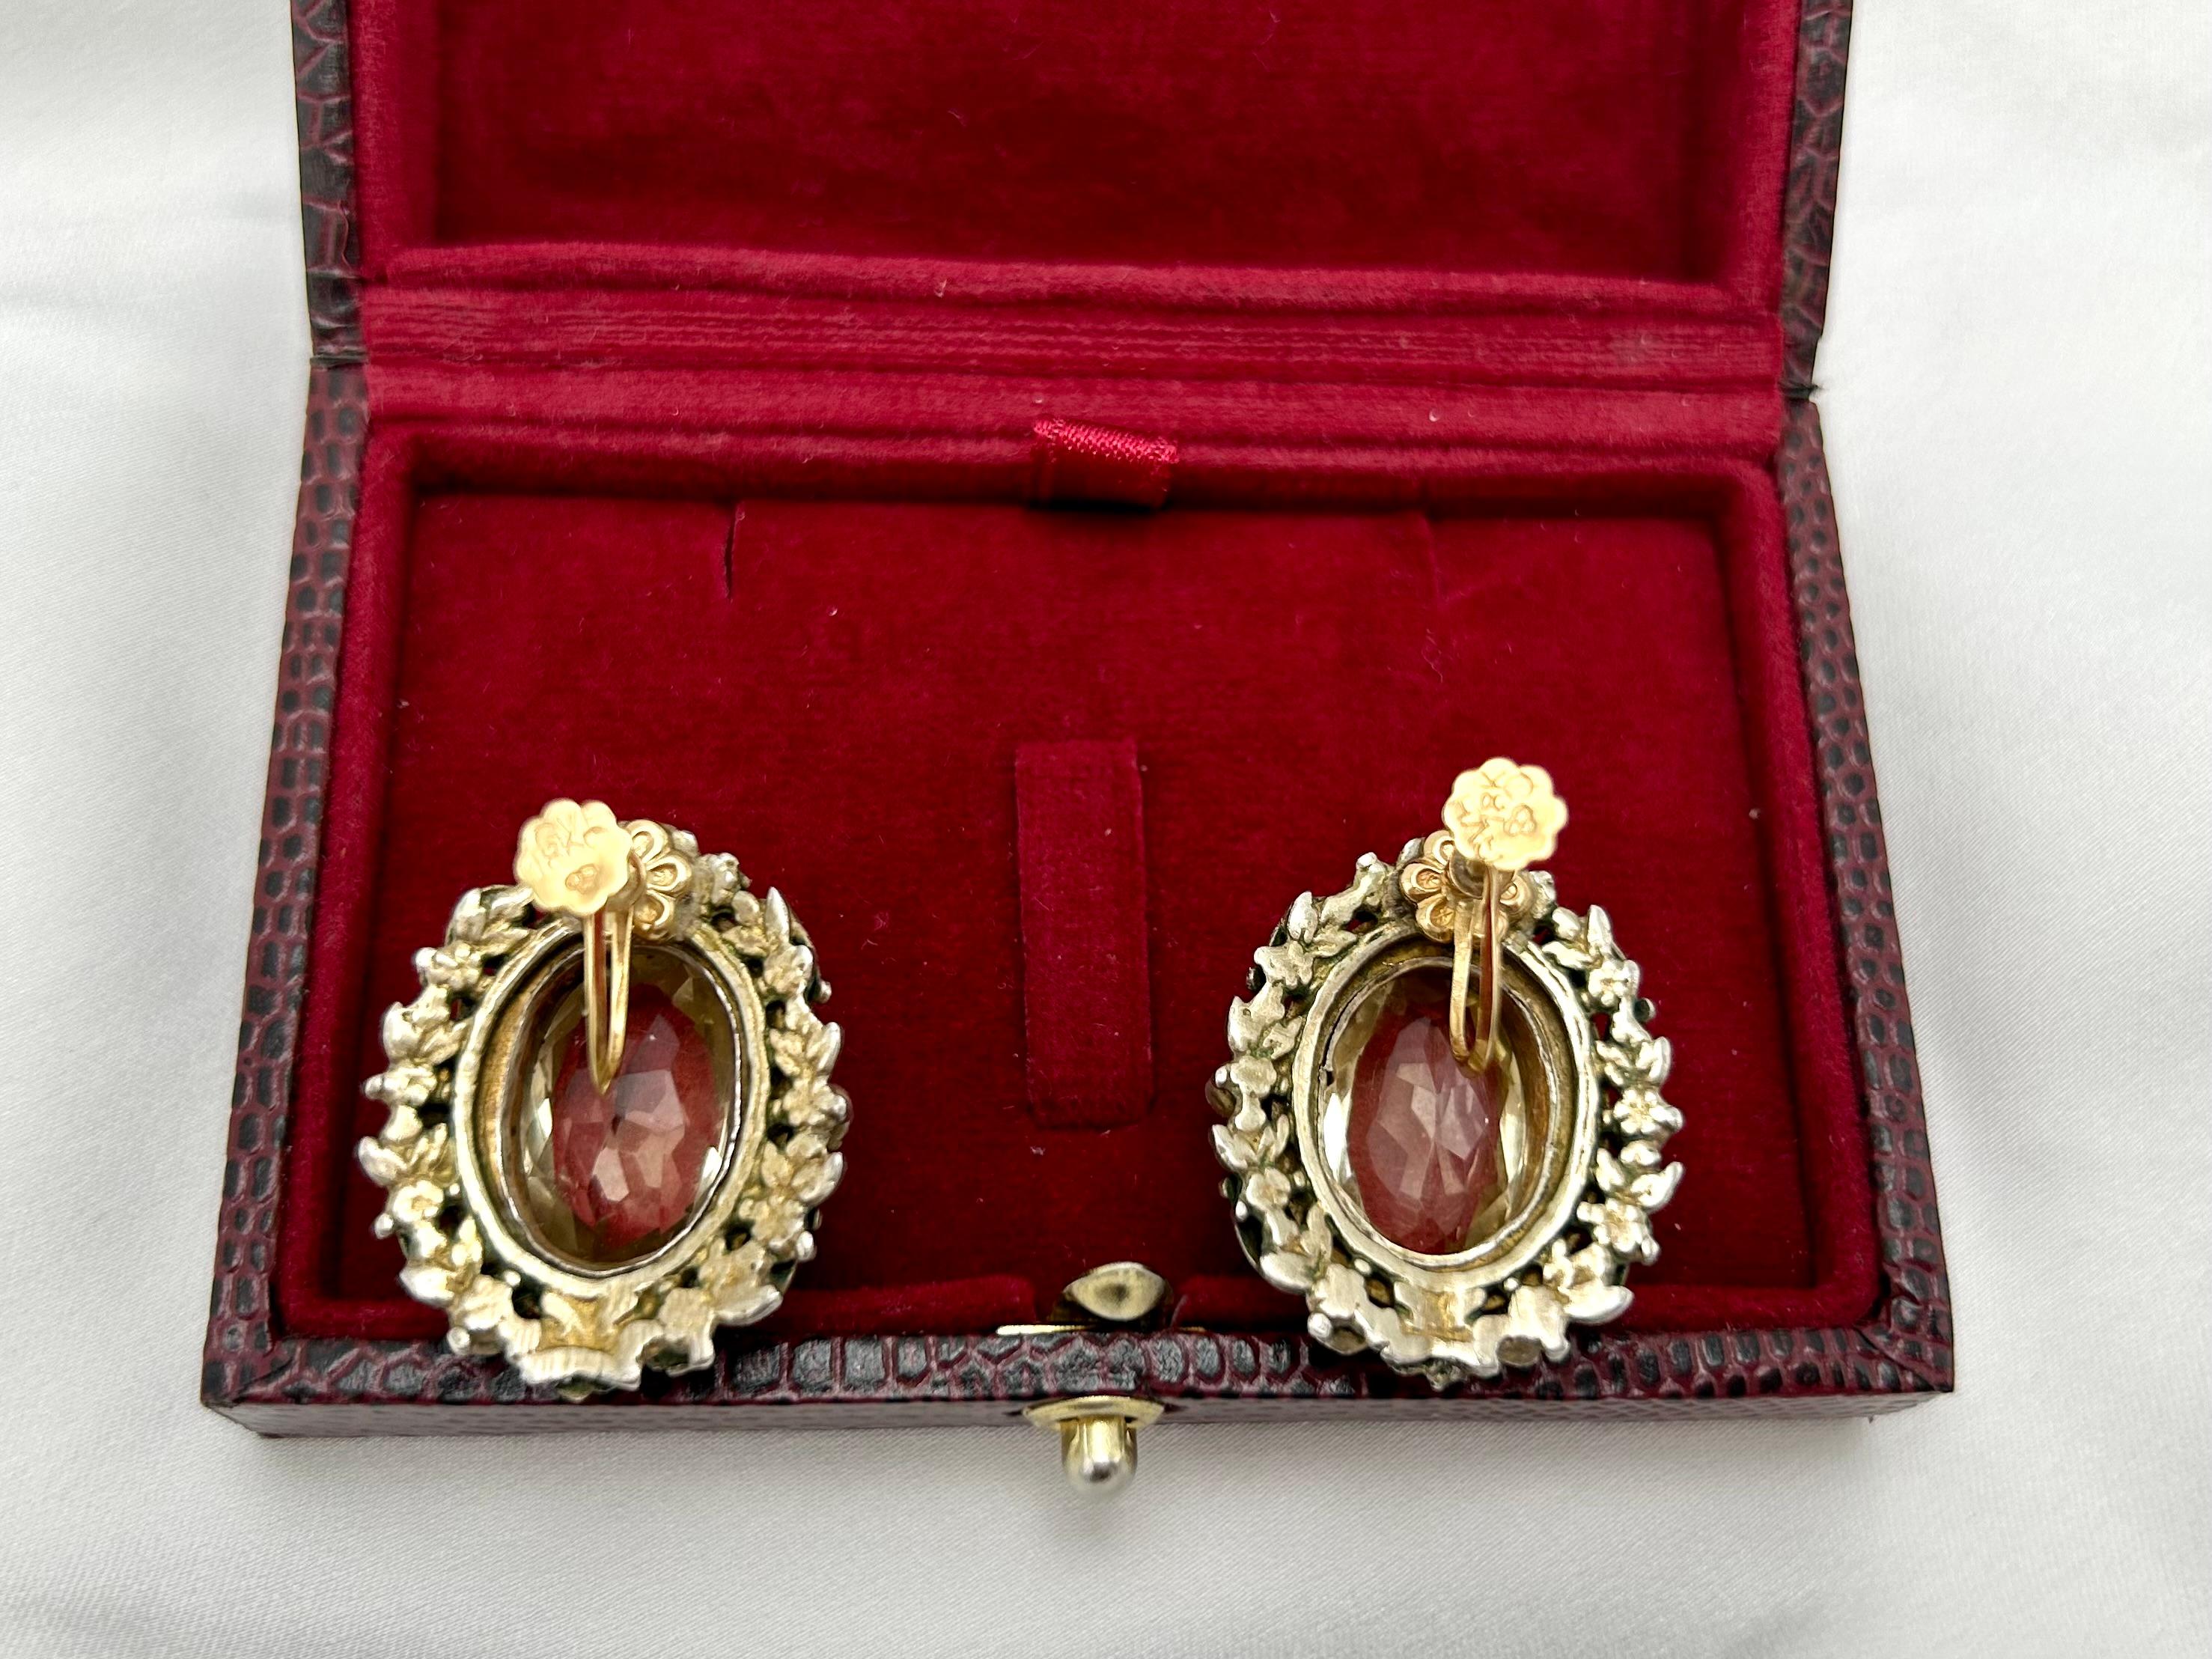 Antique silver earrings with citrines, garnets and pearls, circa 1900. For Sale 1